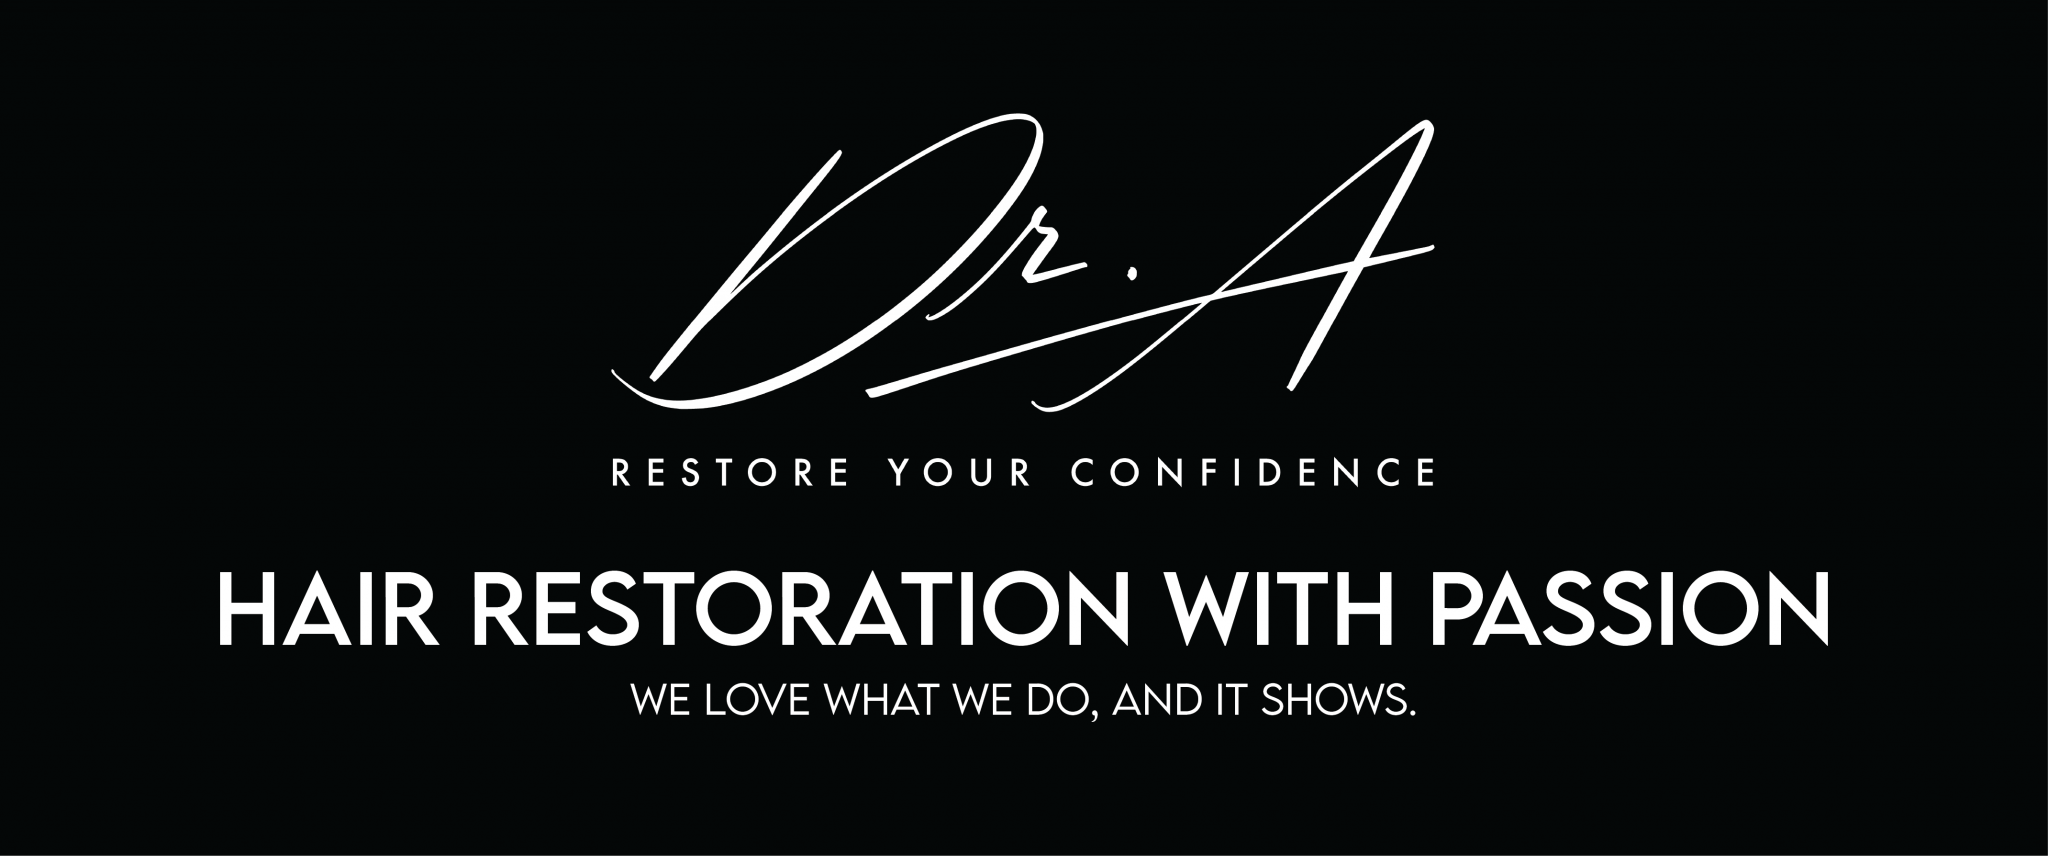 Restore your confidence for hair restoration with passion